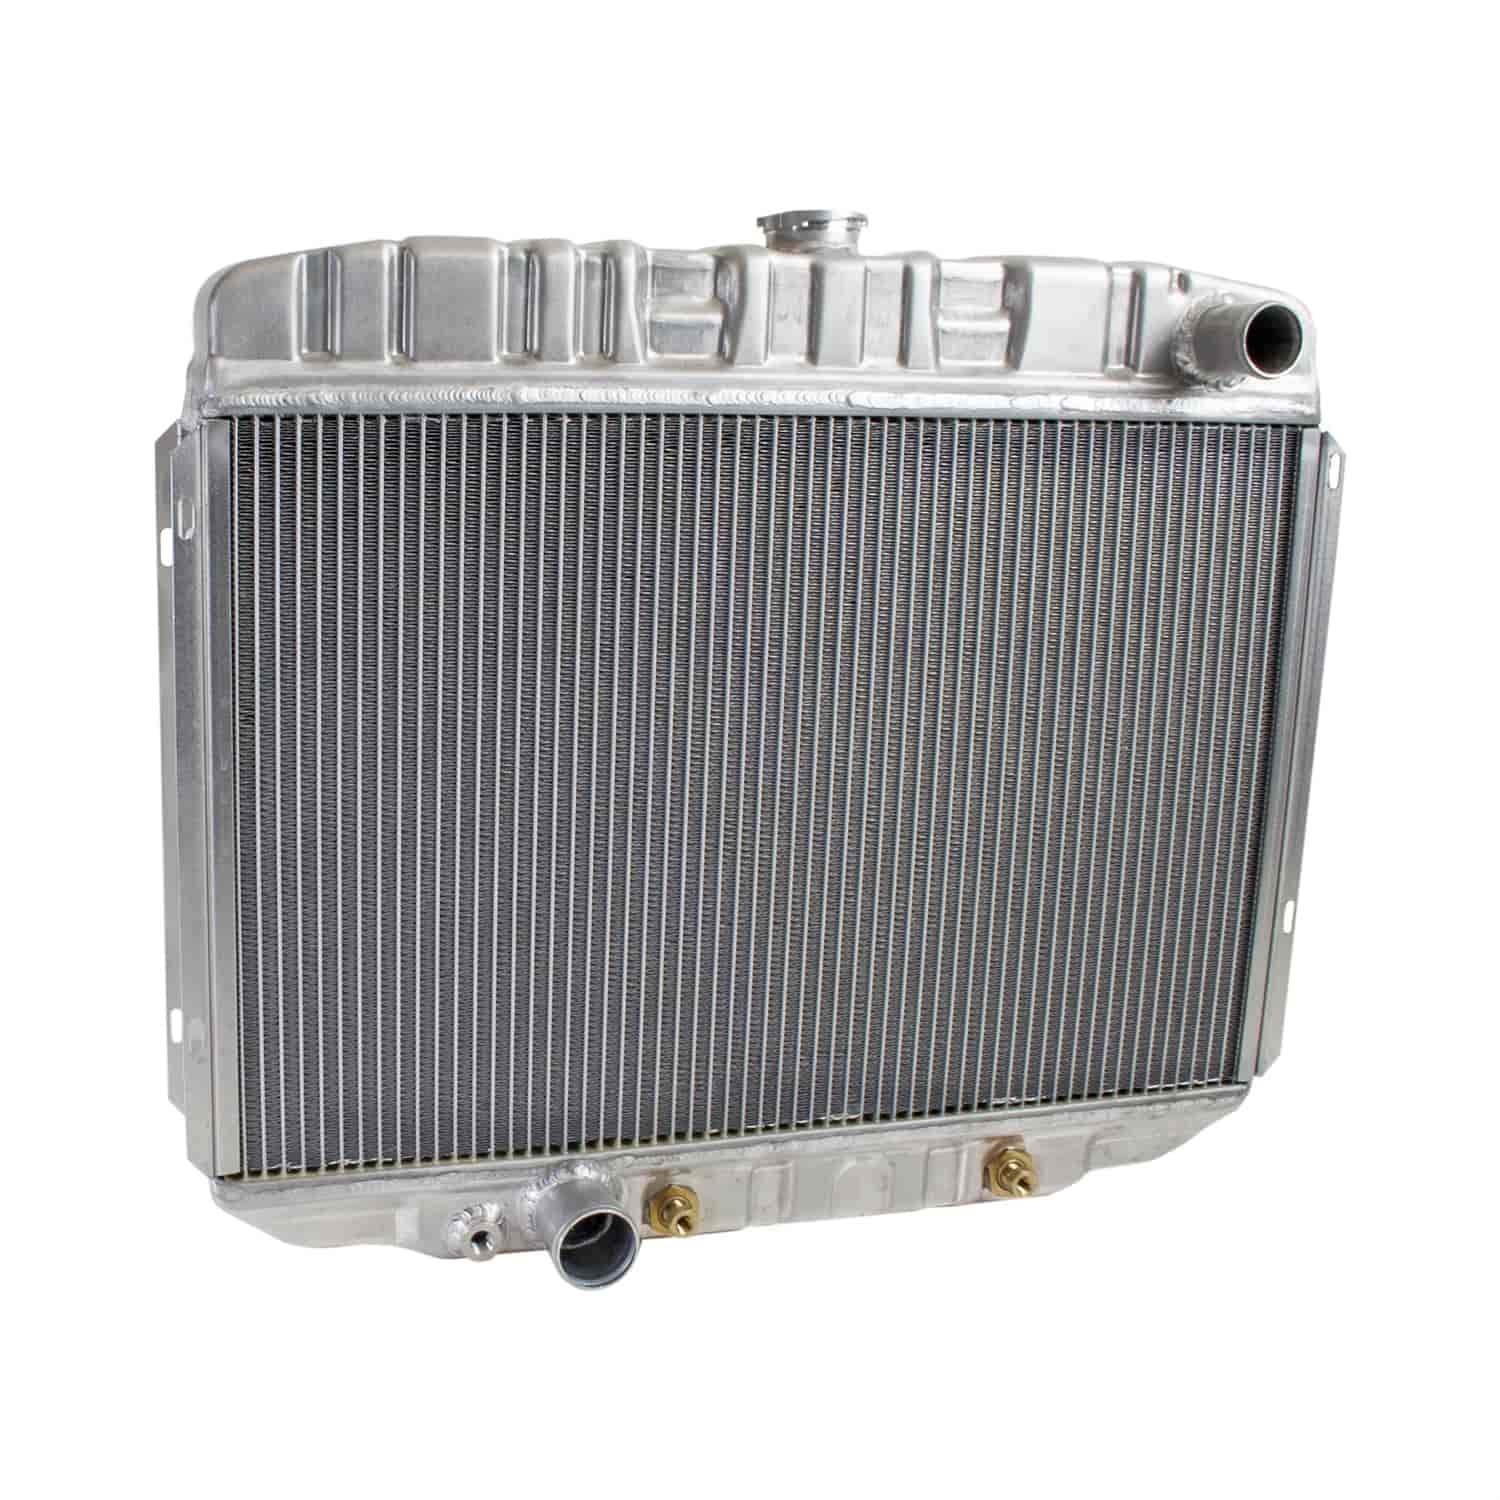 ExactFit Radiator for 1968-1970 Ford Mustang/Mercury Cougar with Big Block & Late Small Block